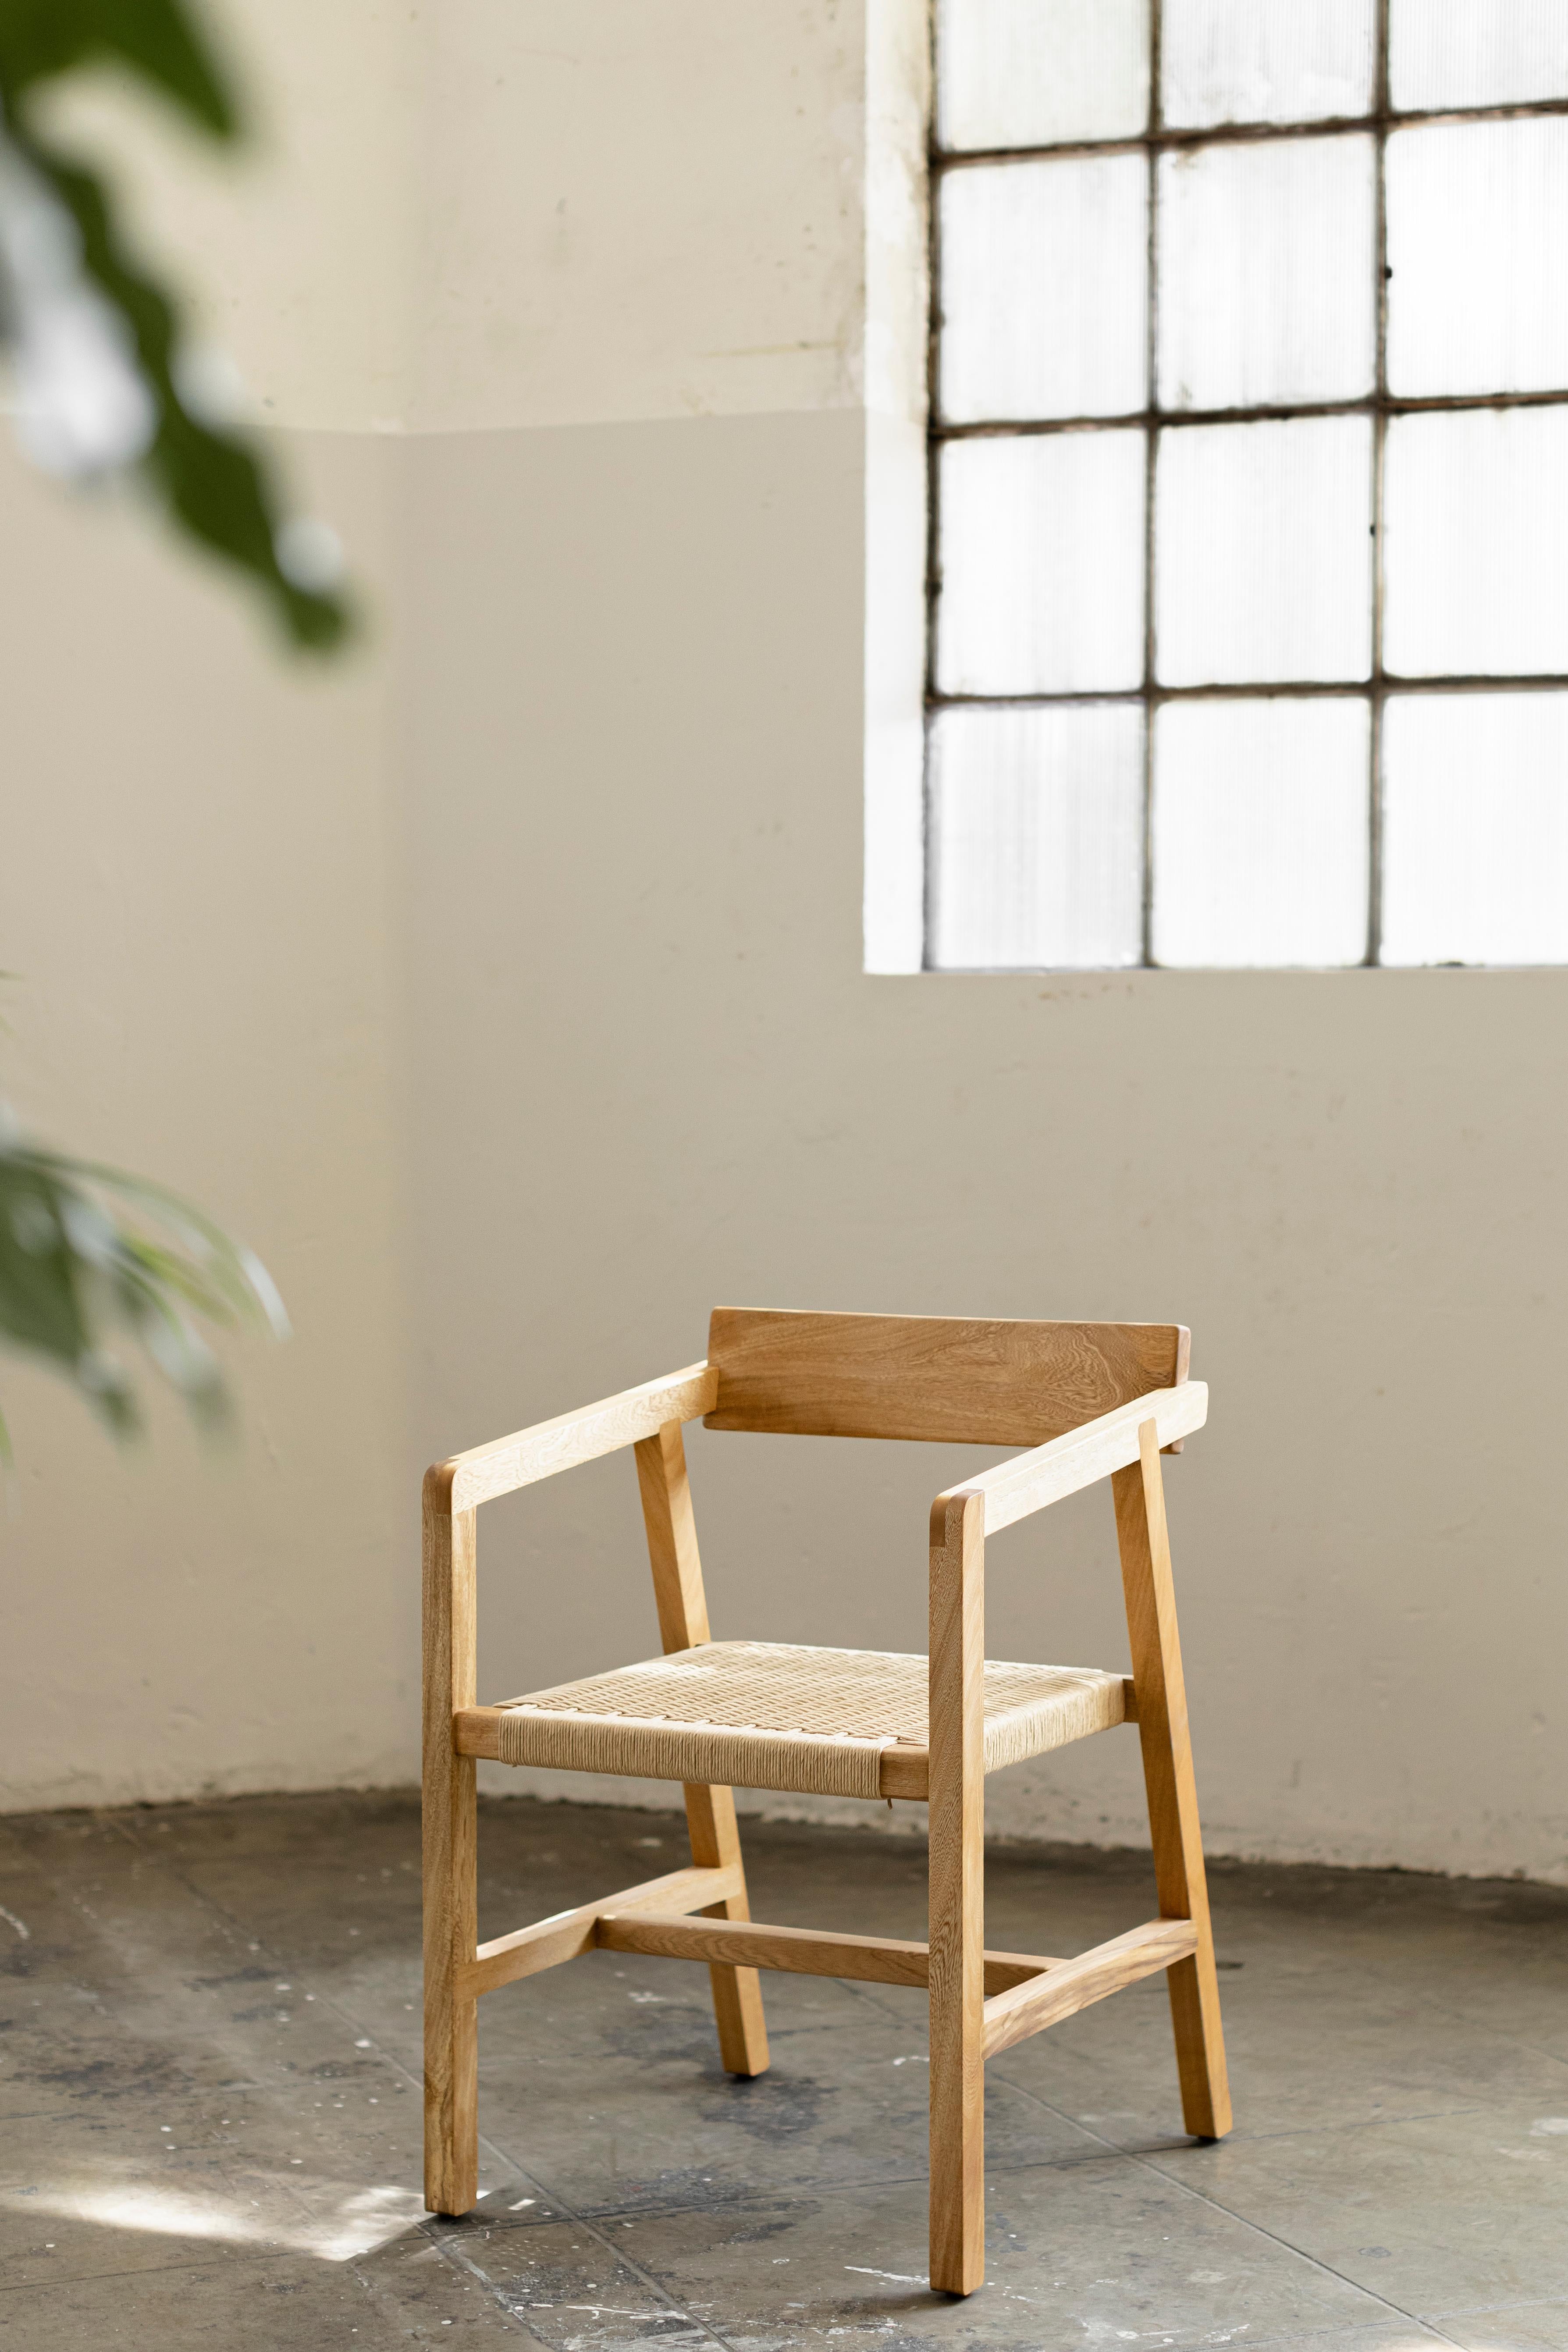 AL Collection wooden chair handwoven with jute or paper cord. Available in oak or tzalam wood.